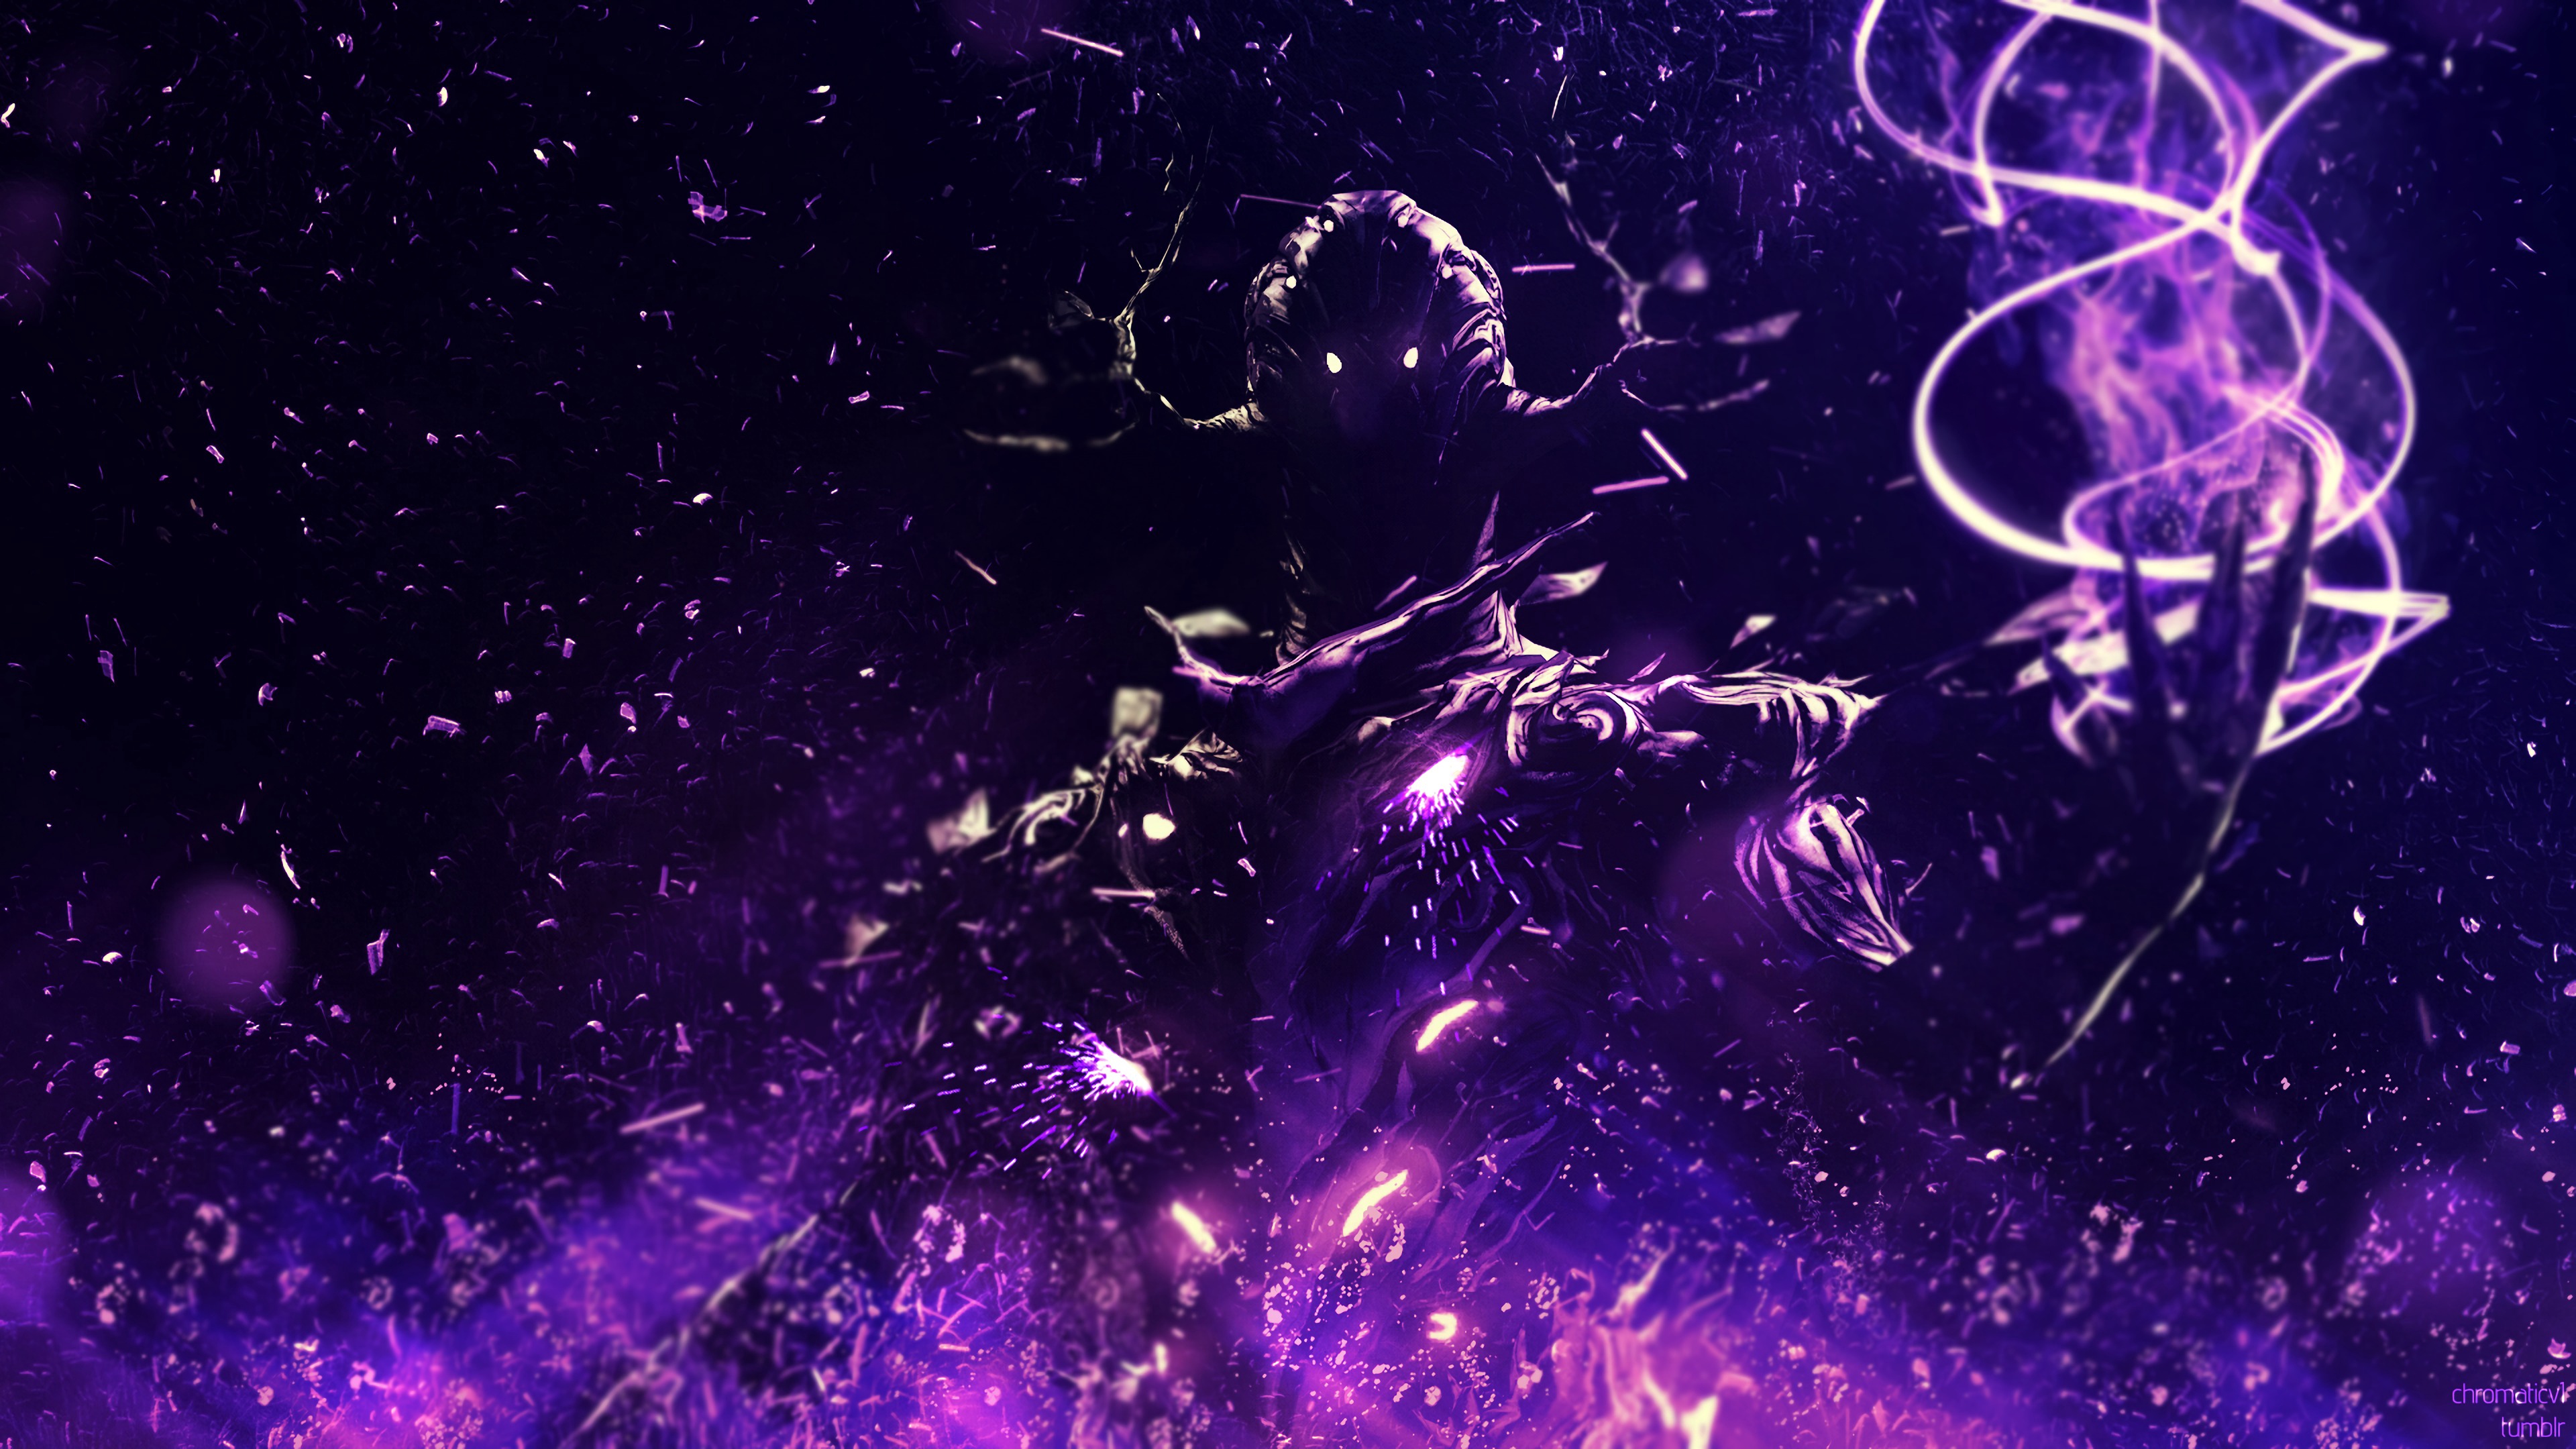 Wallpaper Purple and White Galaxy Illustration, Background Free Image